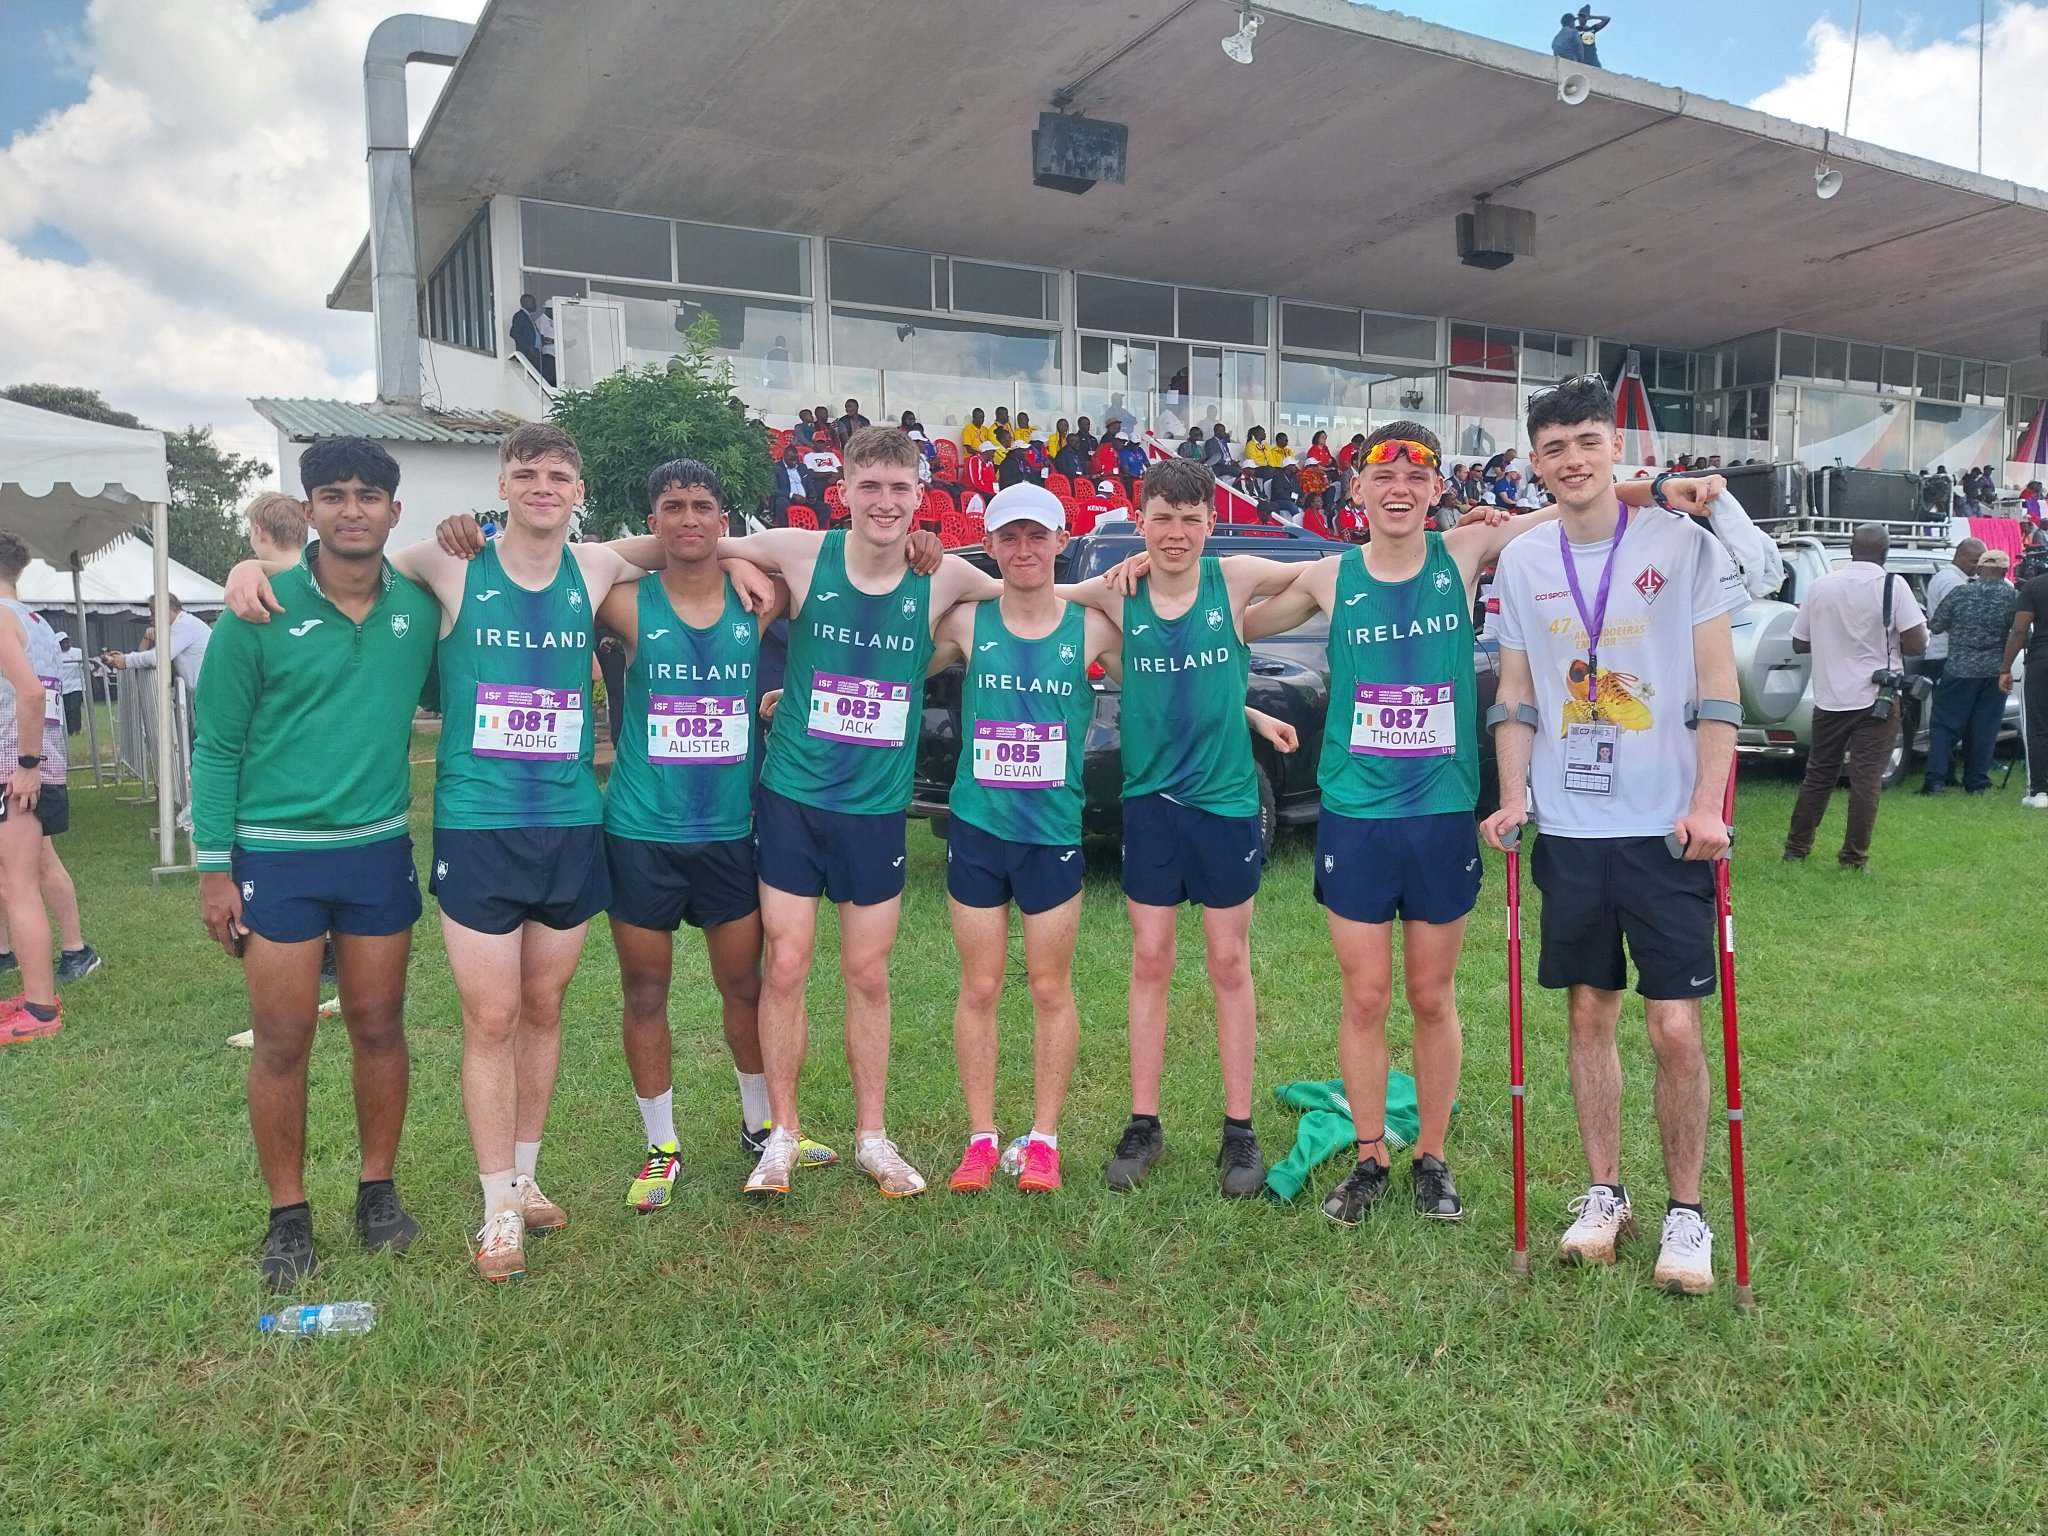 St. Aidan's secure 8th place in World Schools Finals